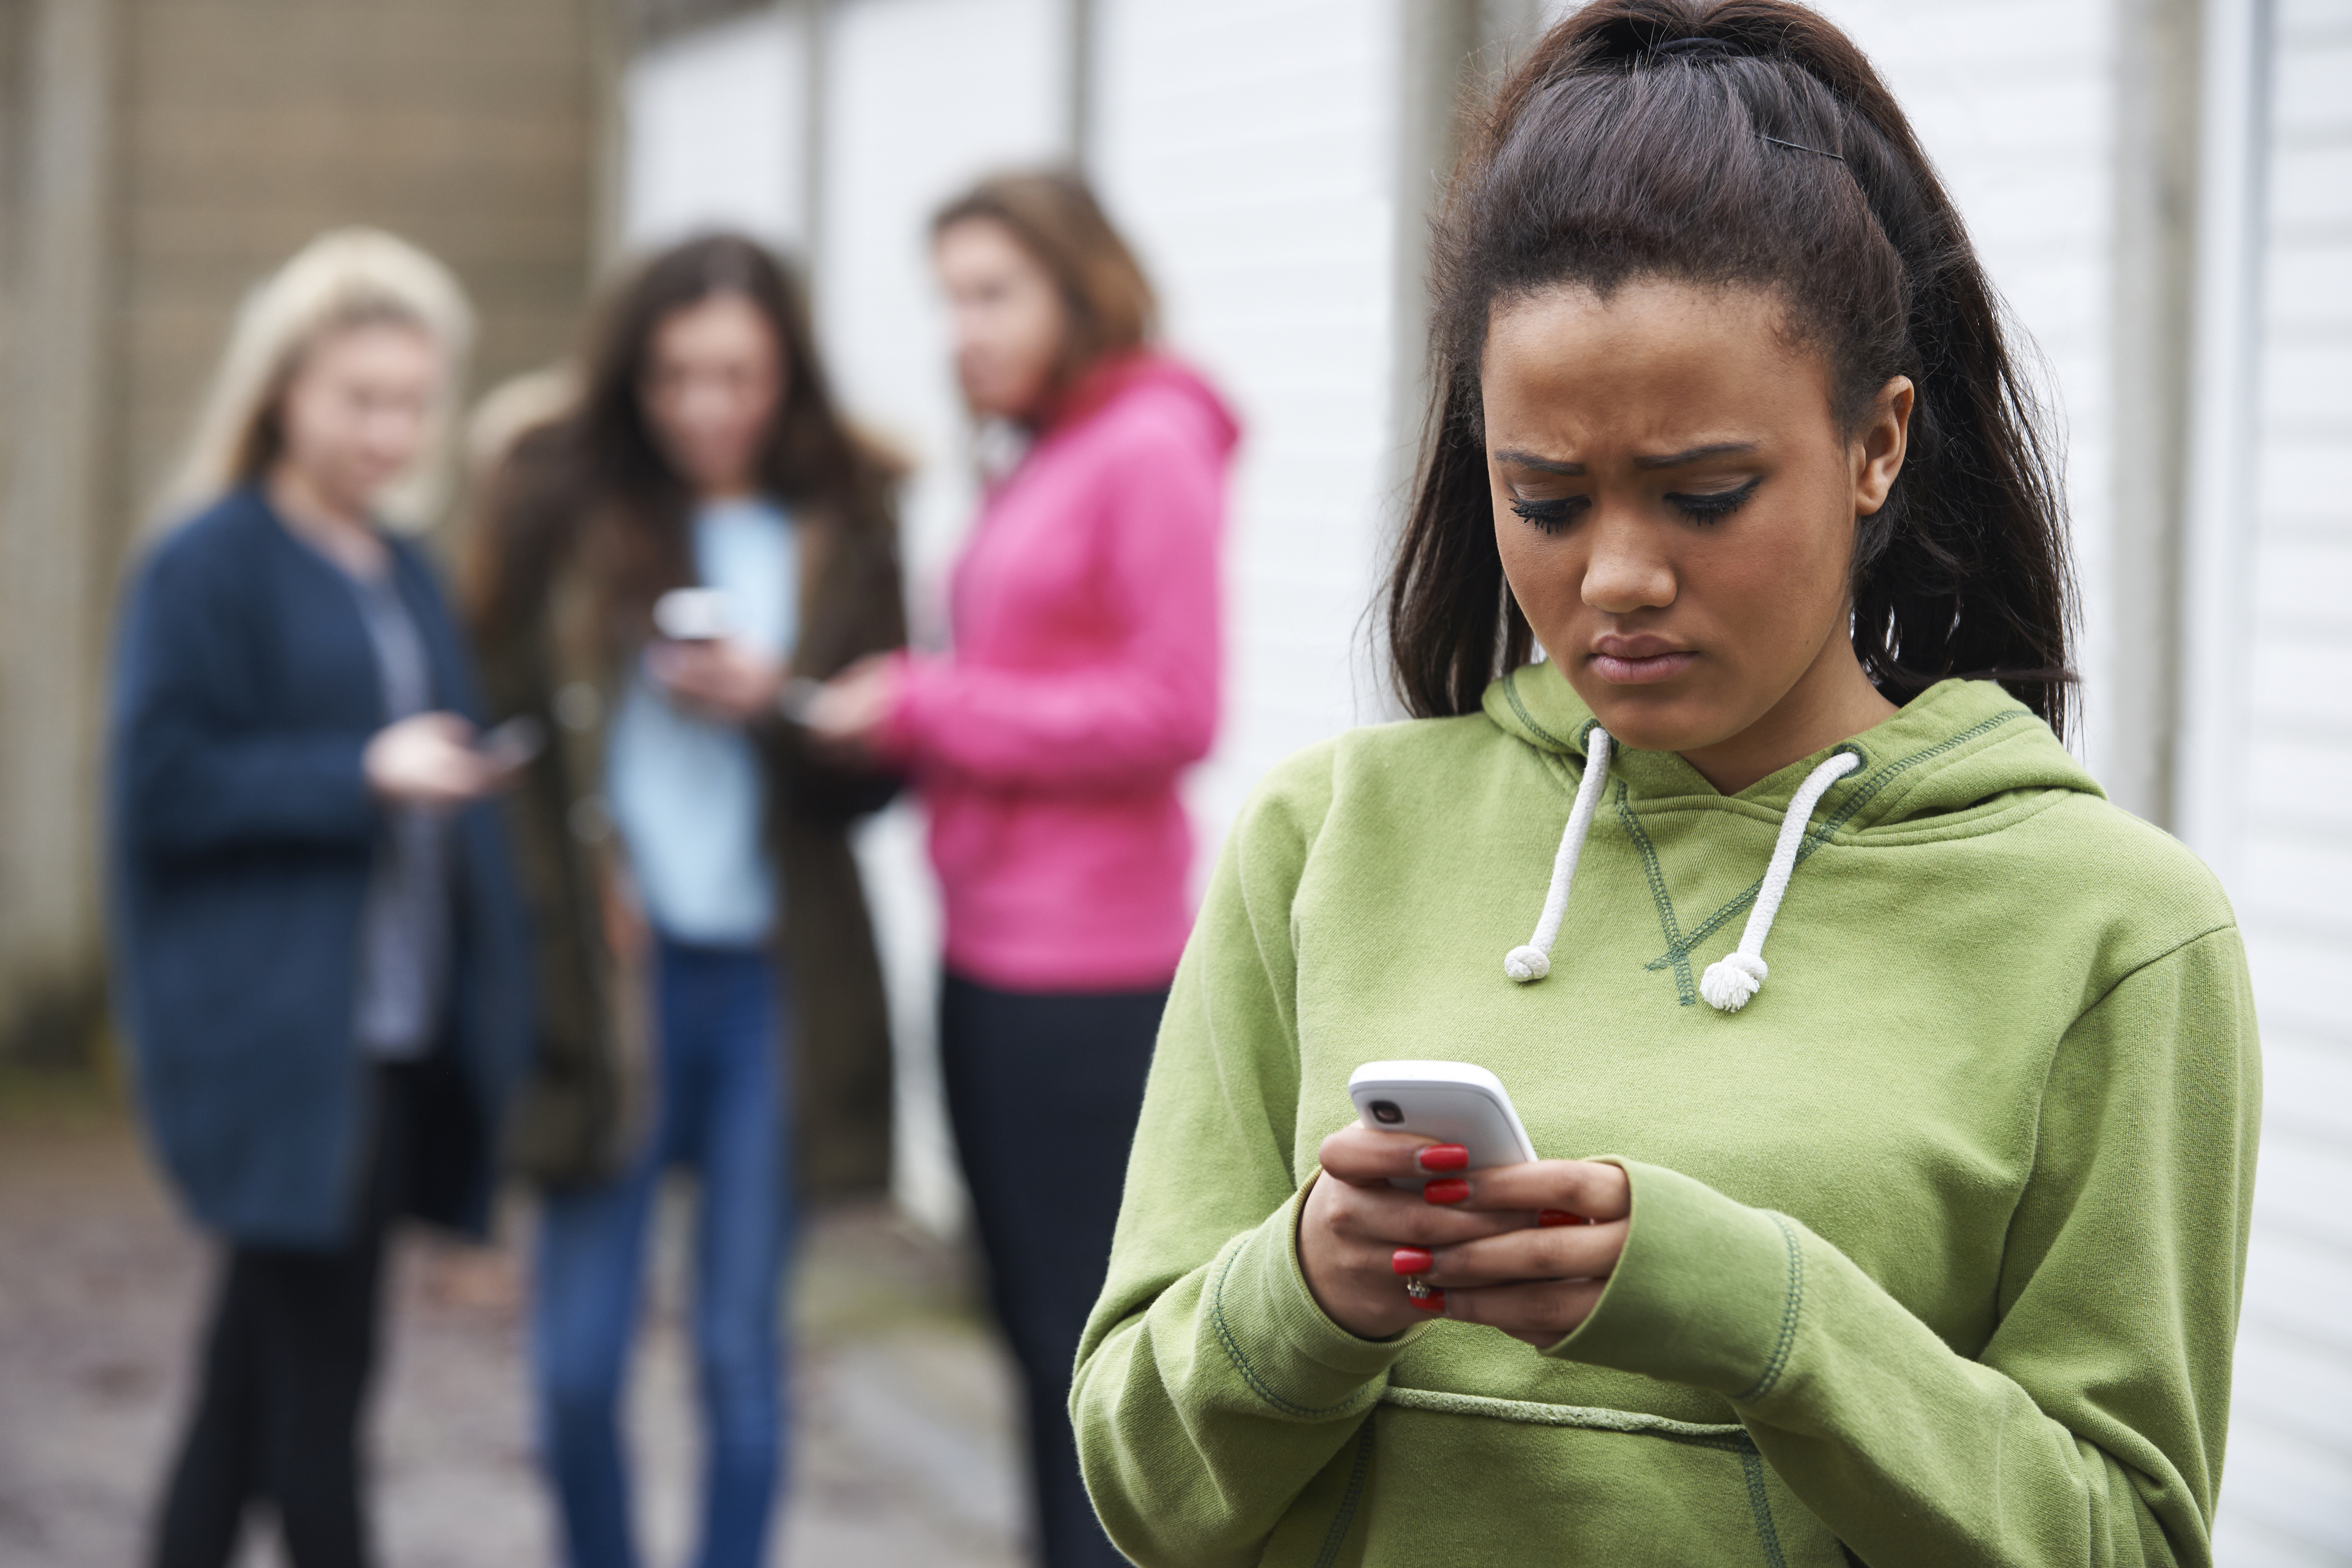 Girl looking worried while looking as she looks at her phone while other girls watching her behind | Source: Shutterstock